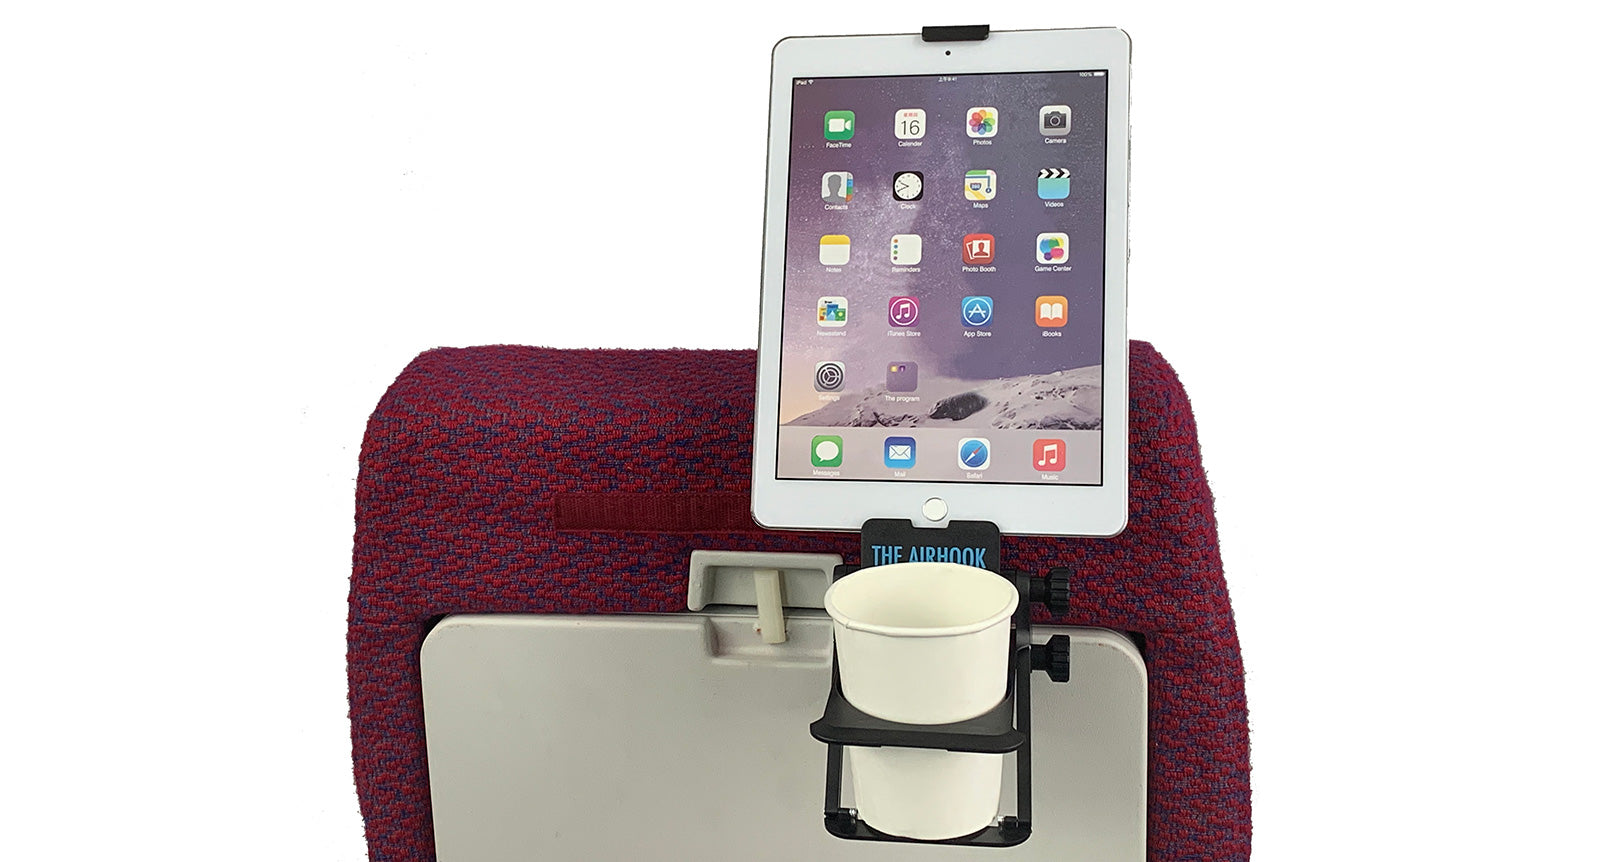 cup holder, airplane cup holder, coffee cup holder